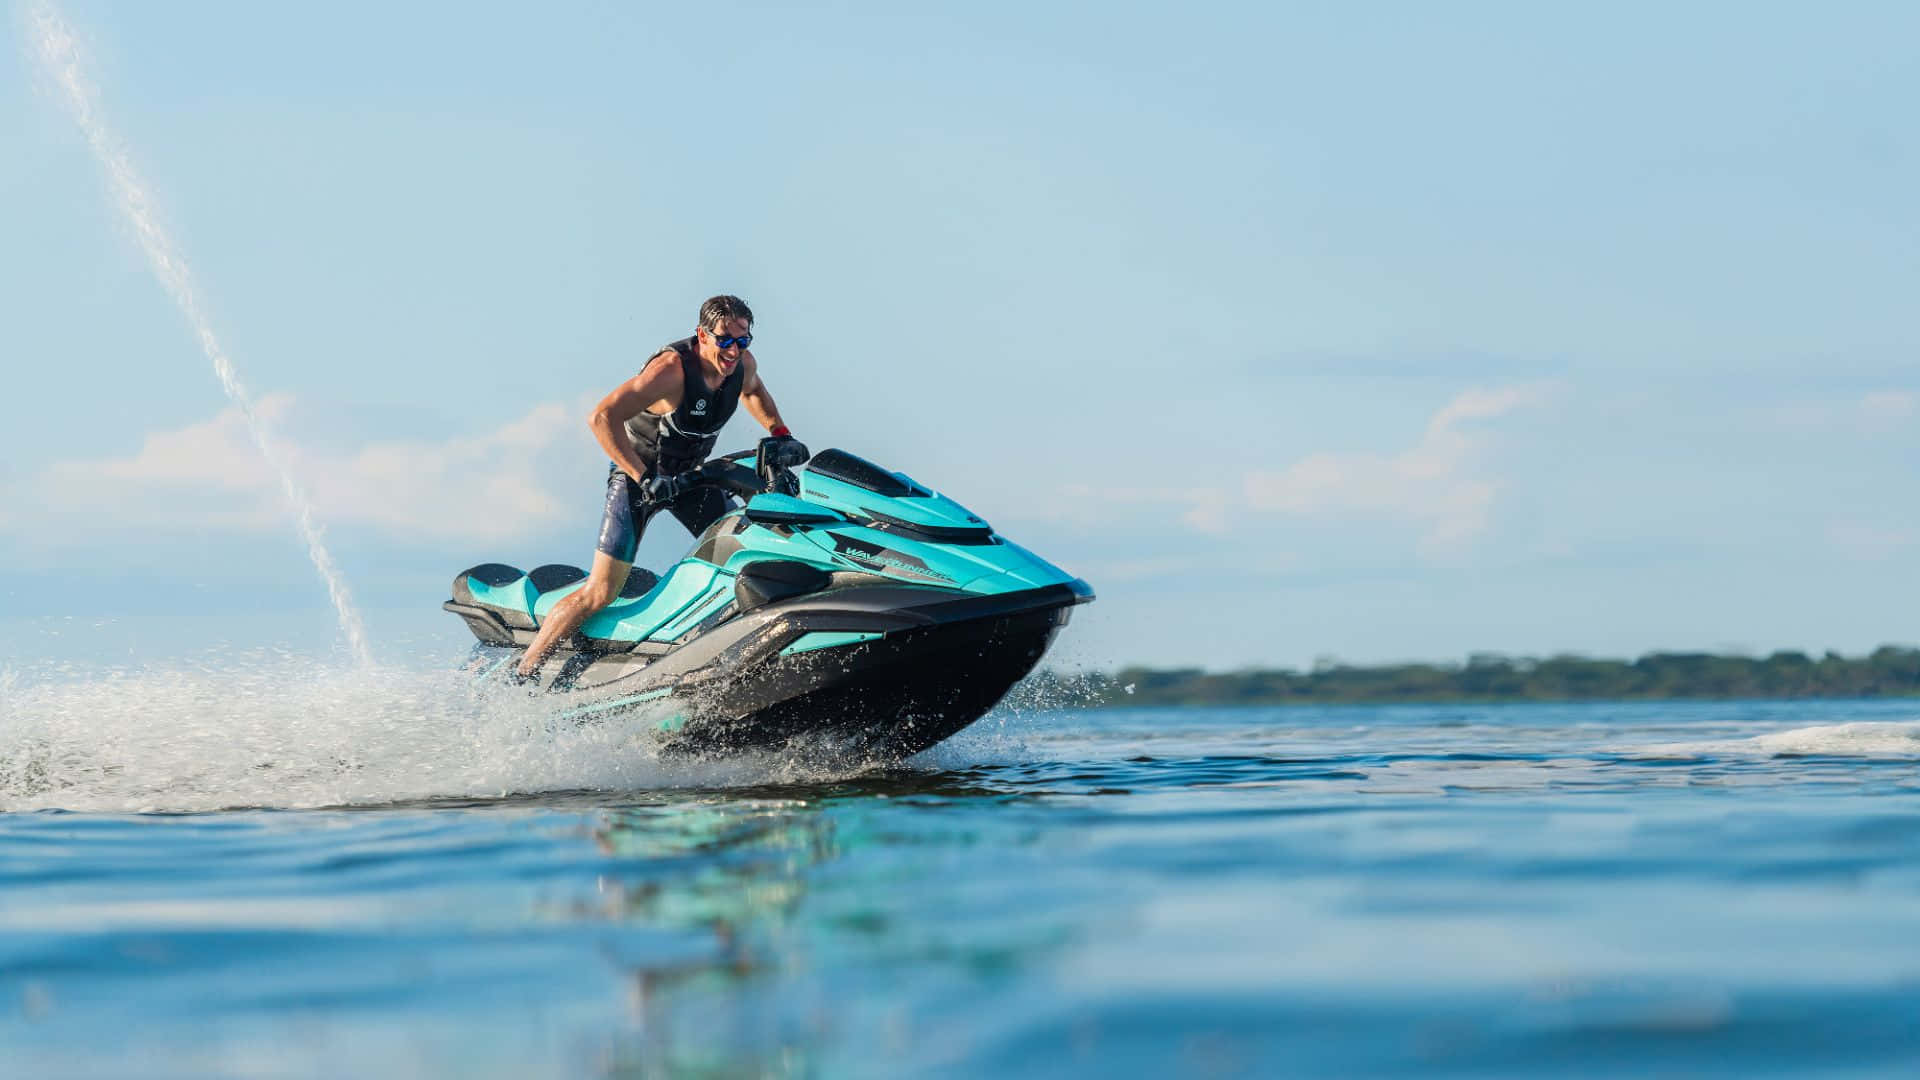 A Striking Blue and Black Jet Ski, Gliding Seamlessly Through The Water Wallpaper